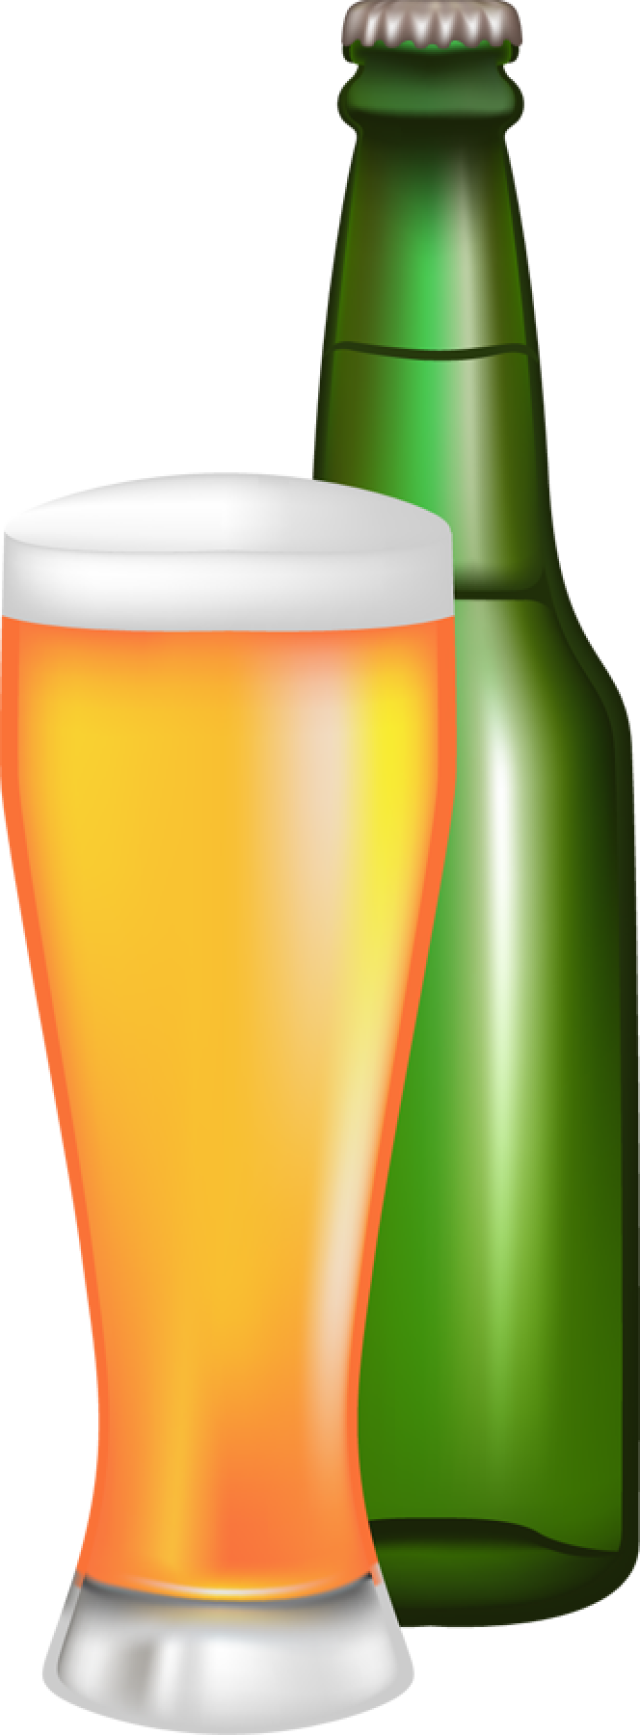 Beer bottle clipart - Clipground